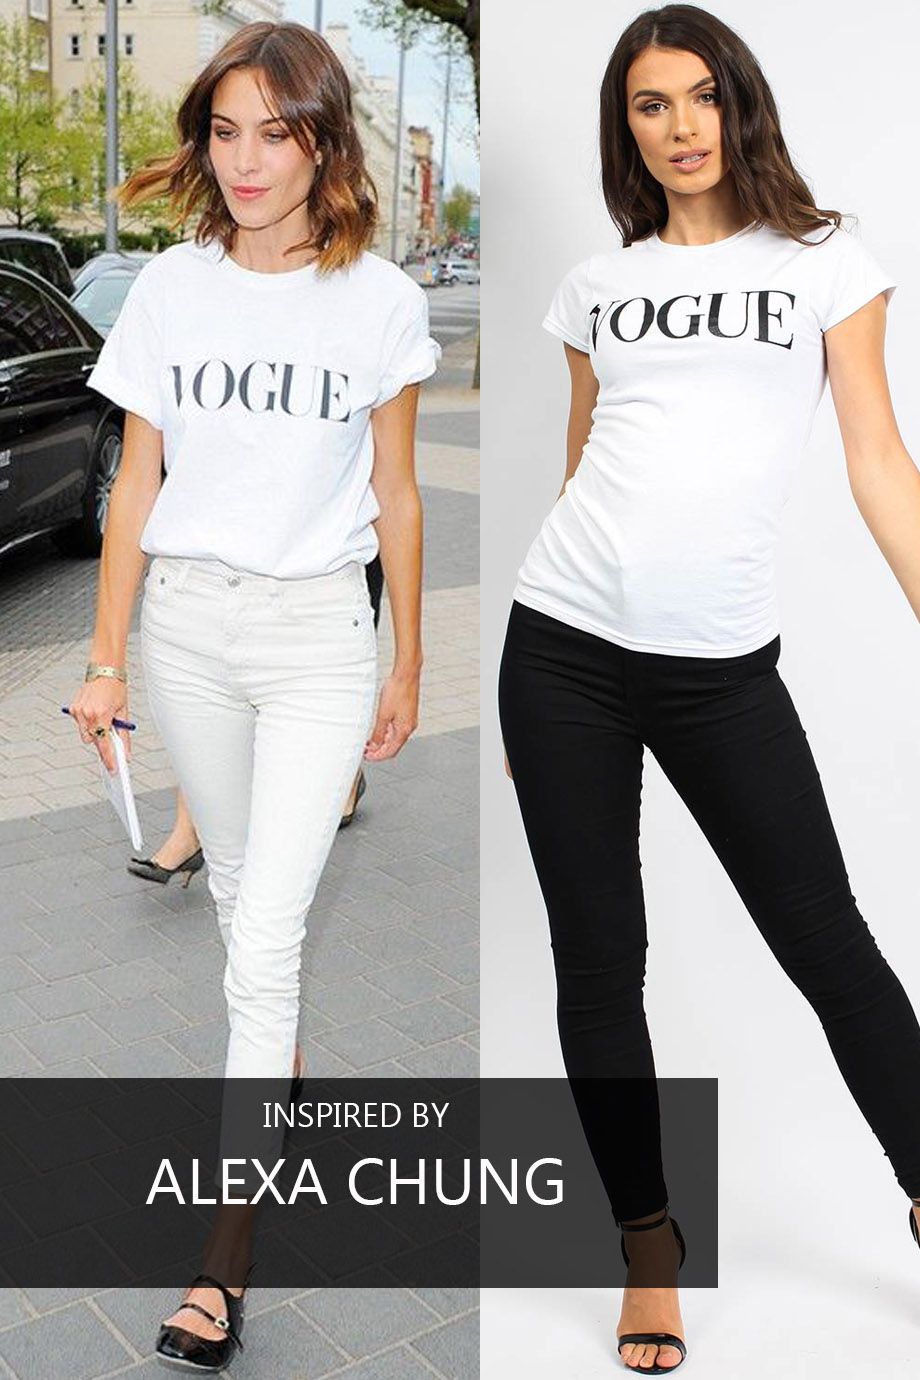 Vogue Slogan Fitted T-Shirt (Pack of 6)